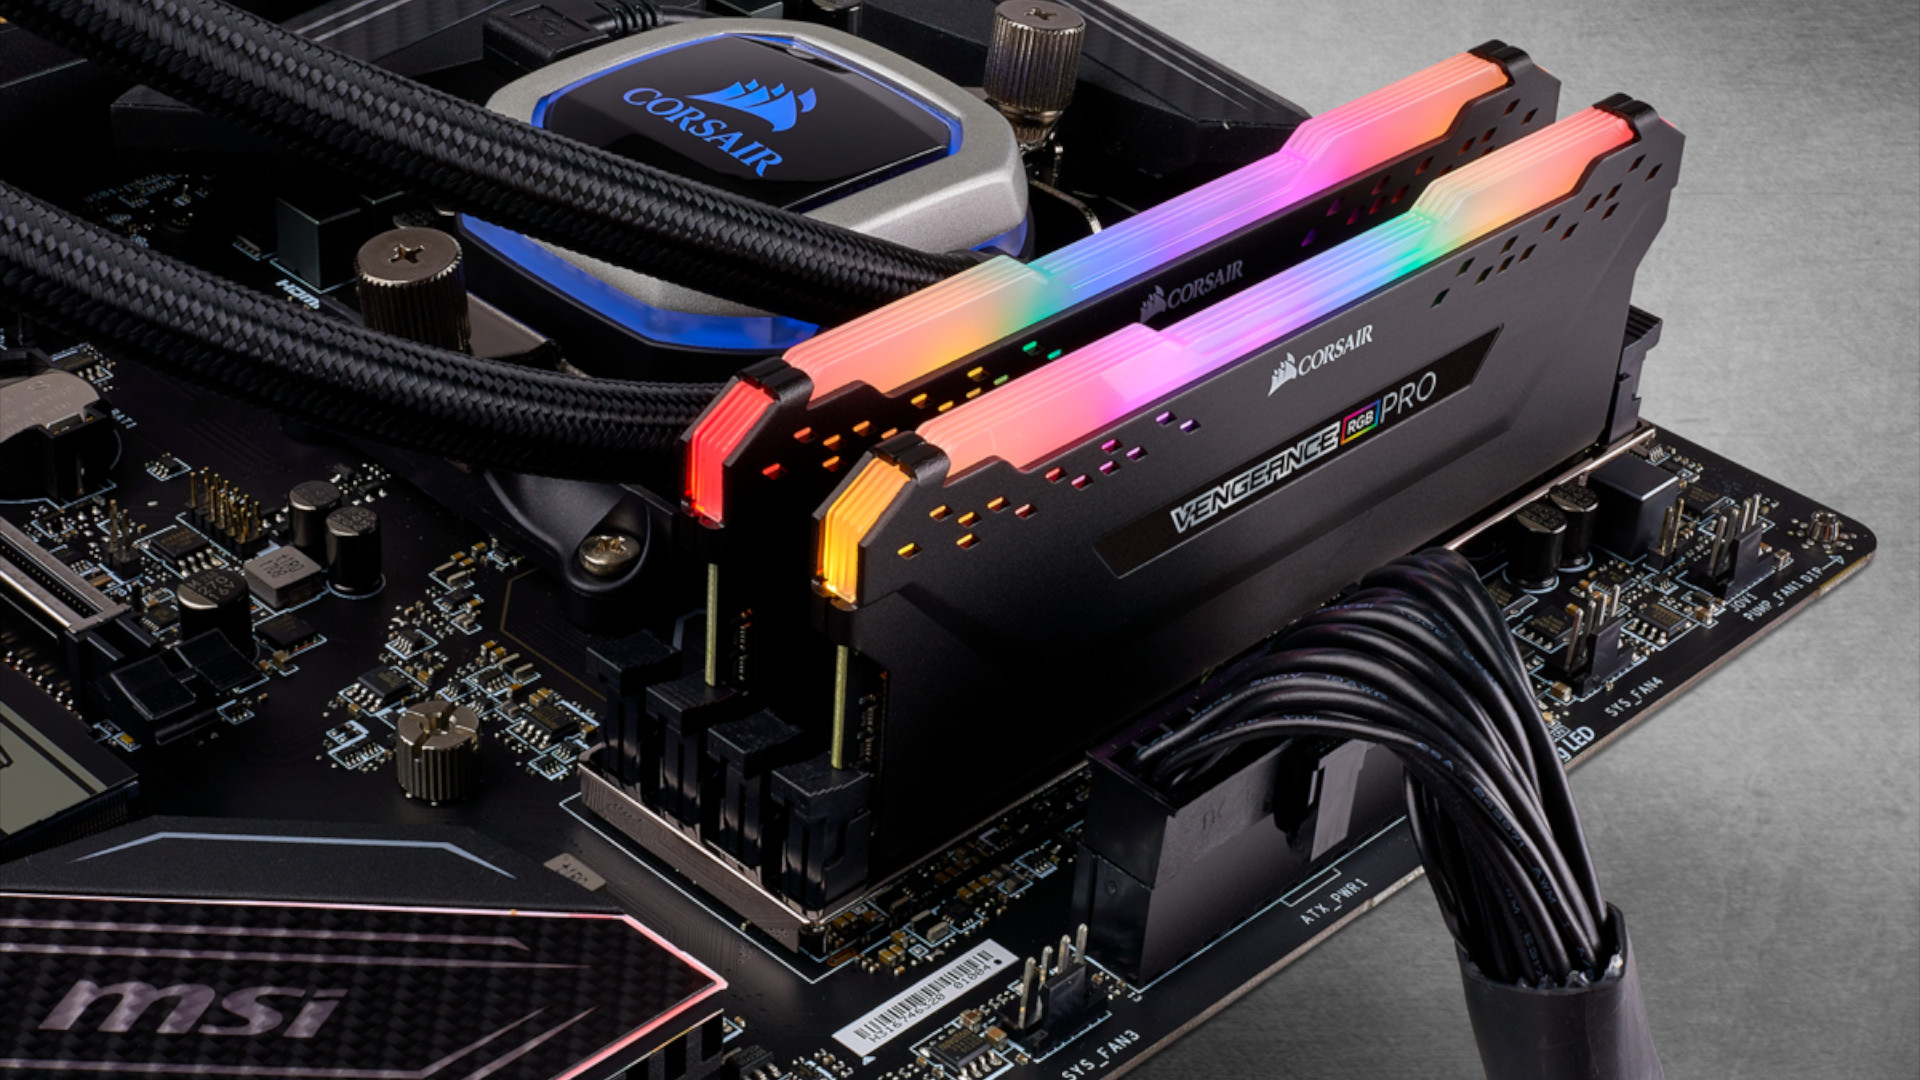 The ongoing chip shortage is now affecting gaming RAM prices and availability